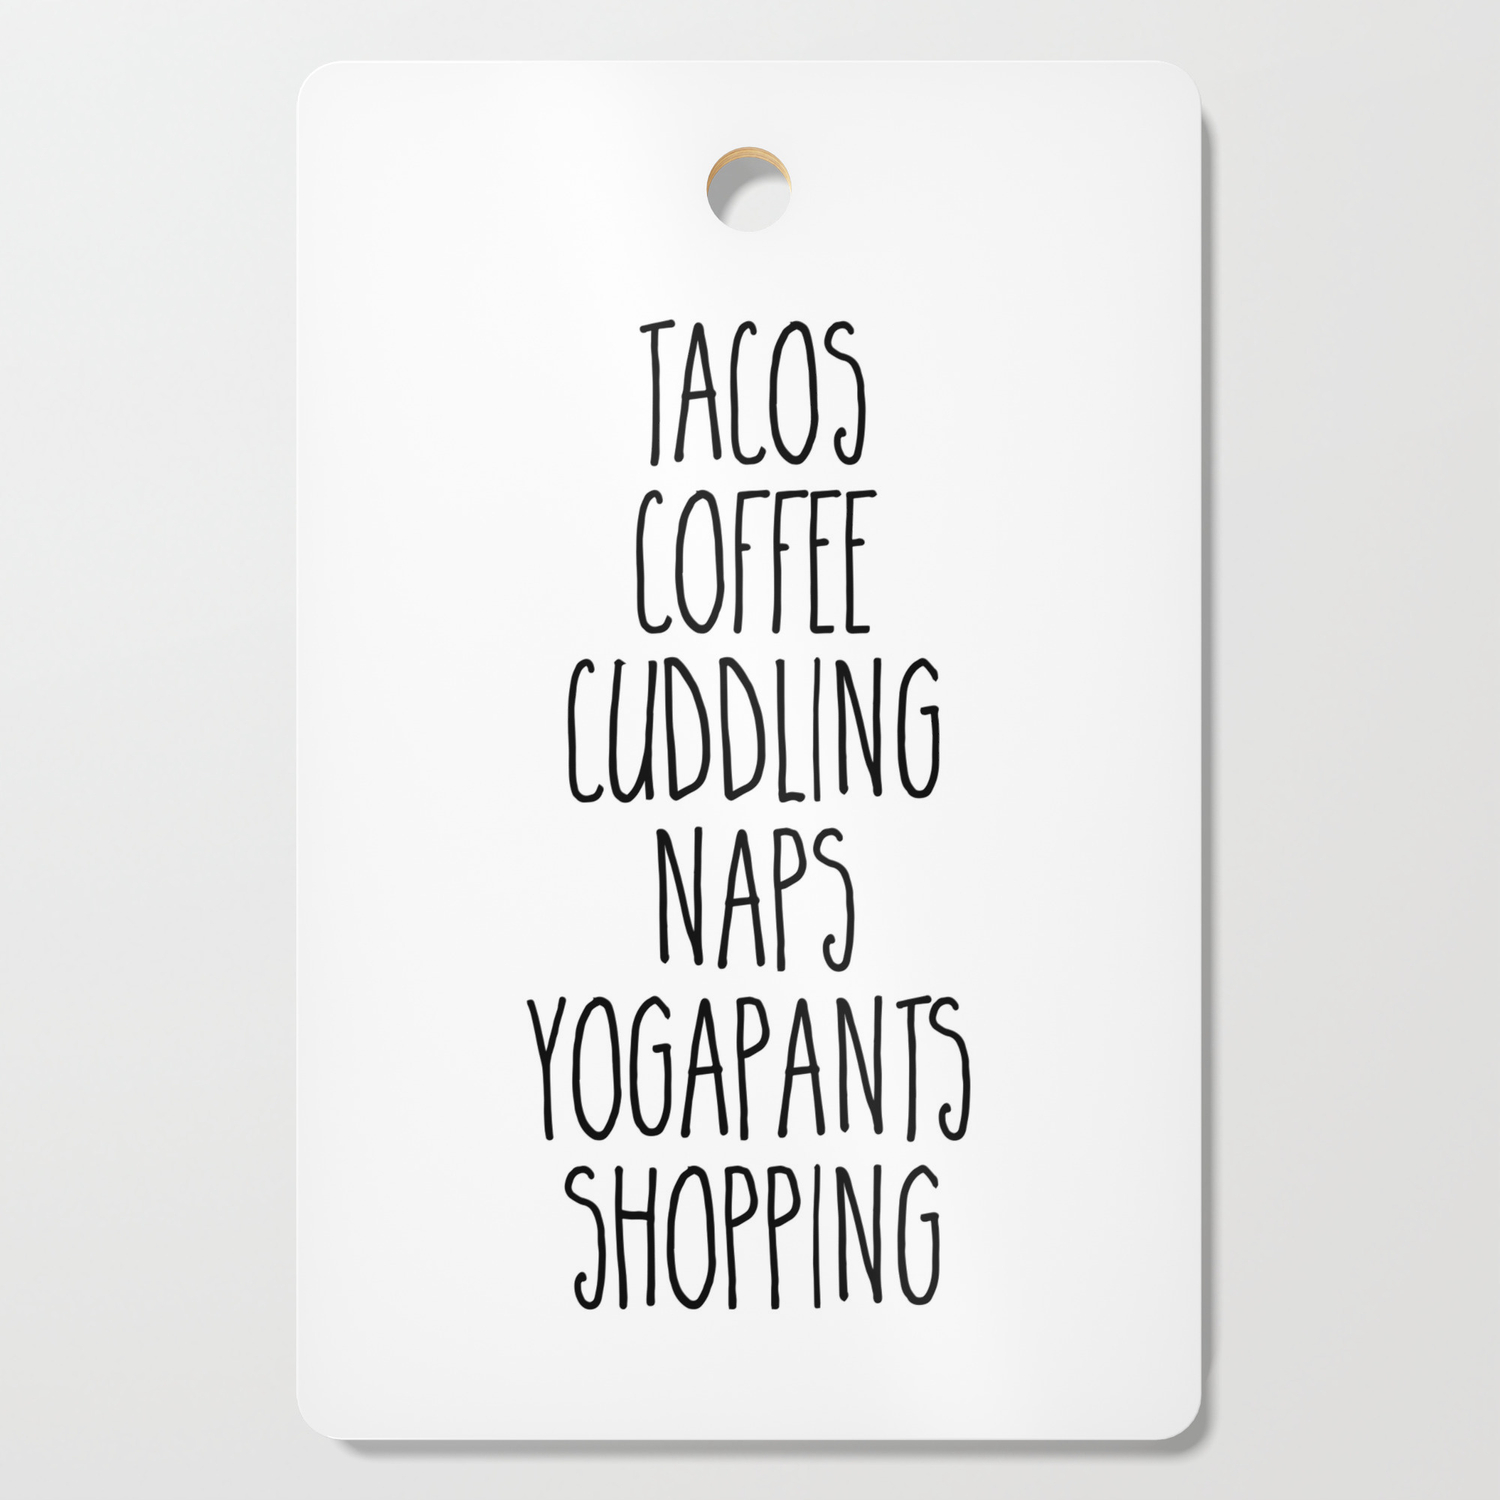 Tacos & Coffee Funny Quote Cutting Board by EnvyArt | Society6